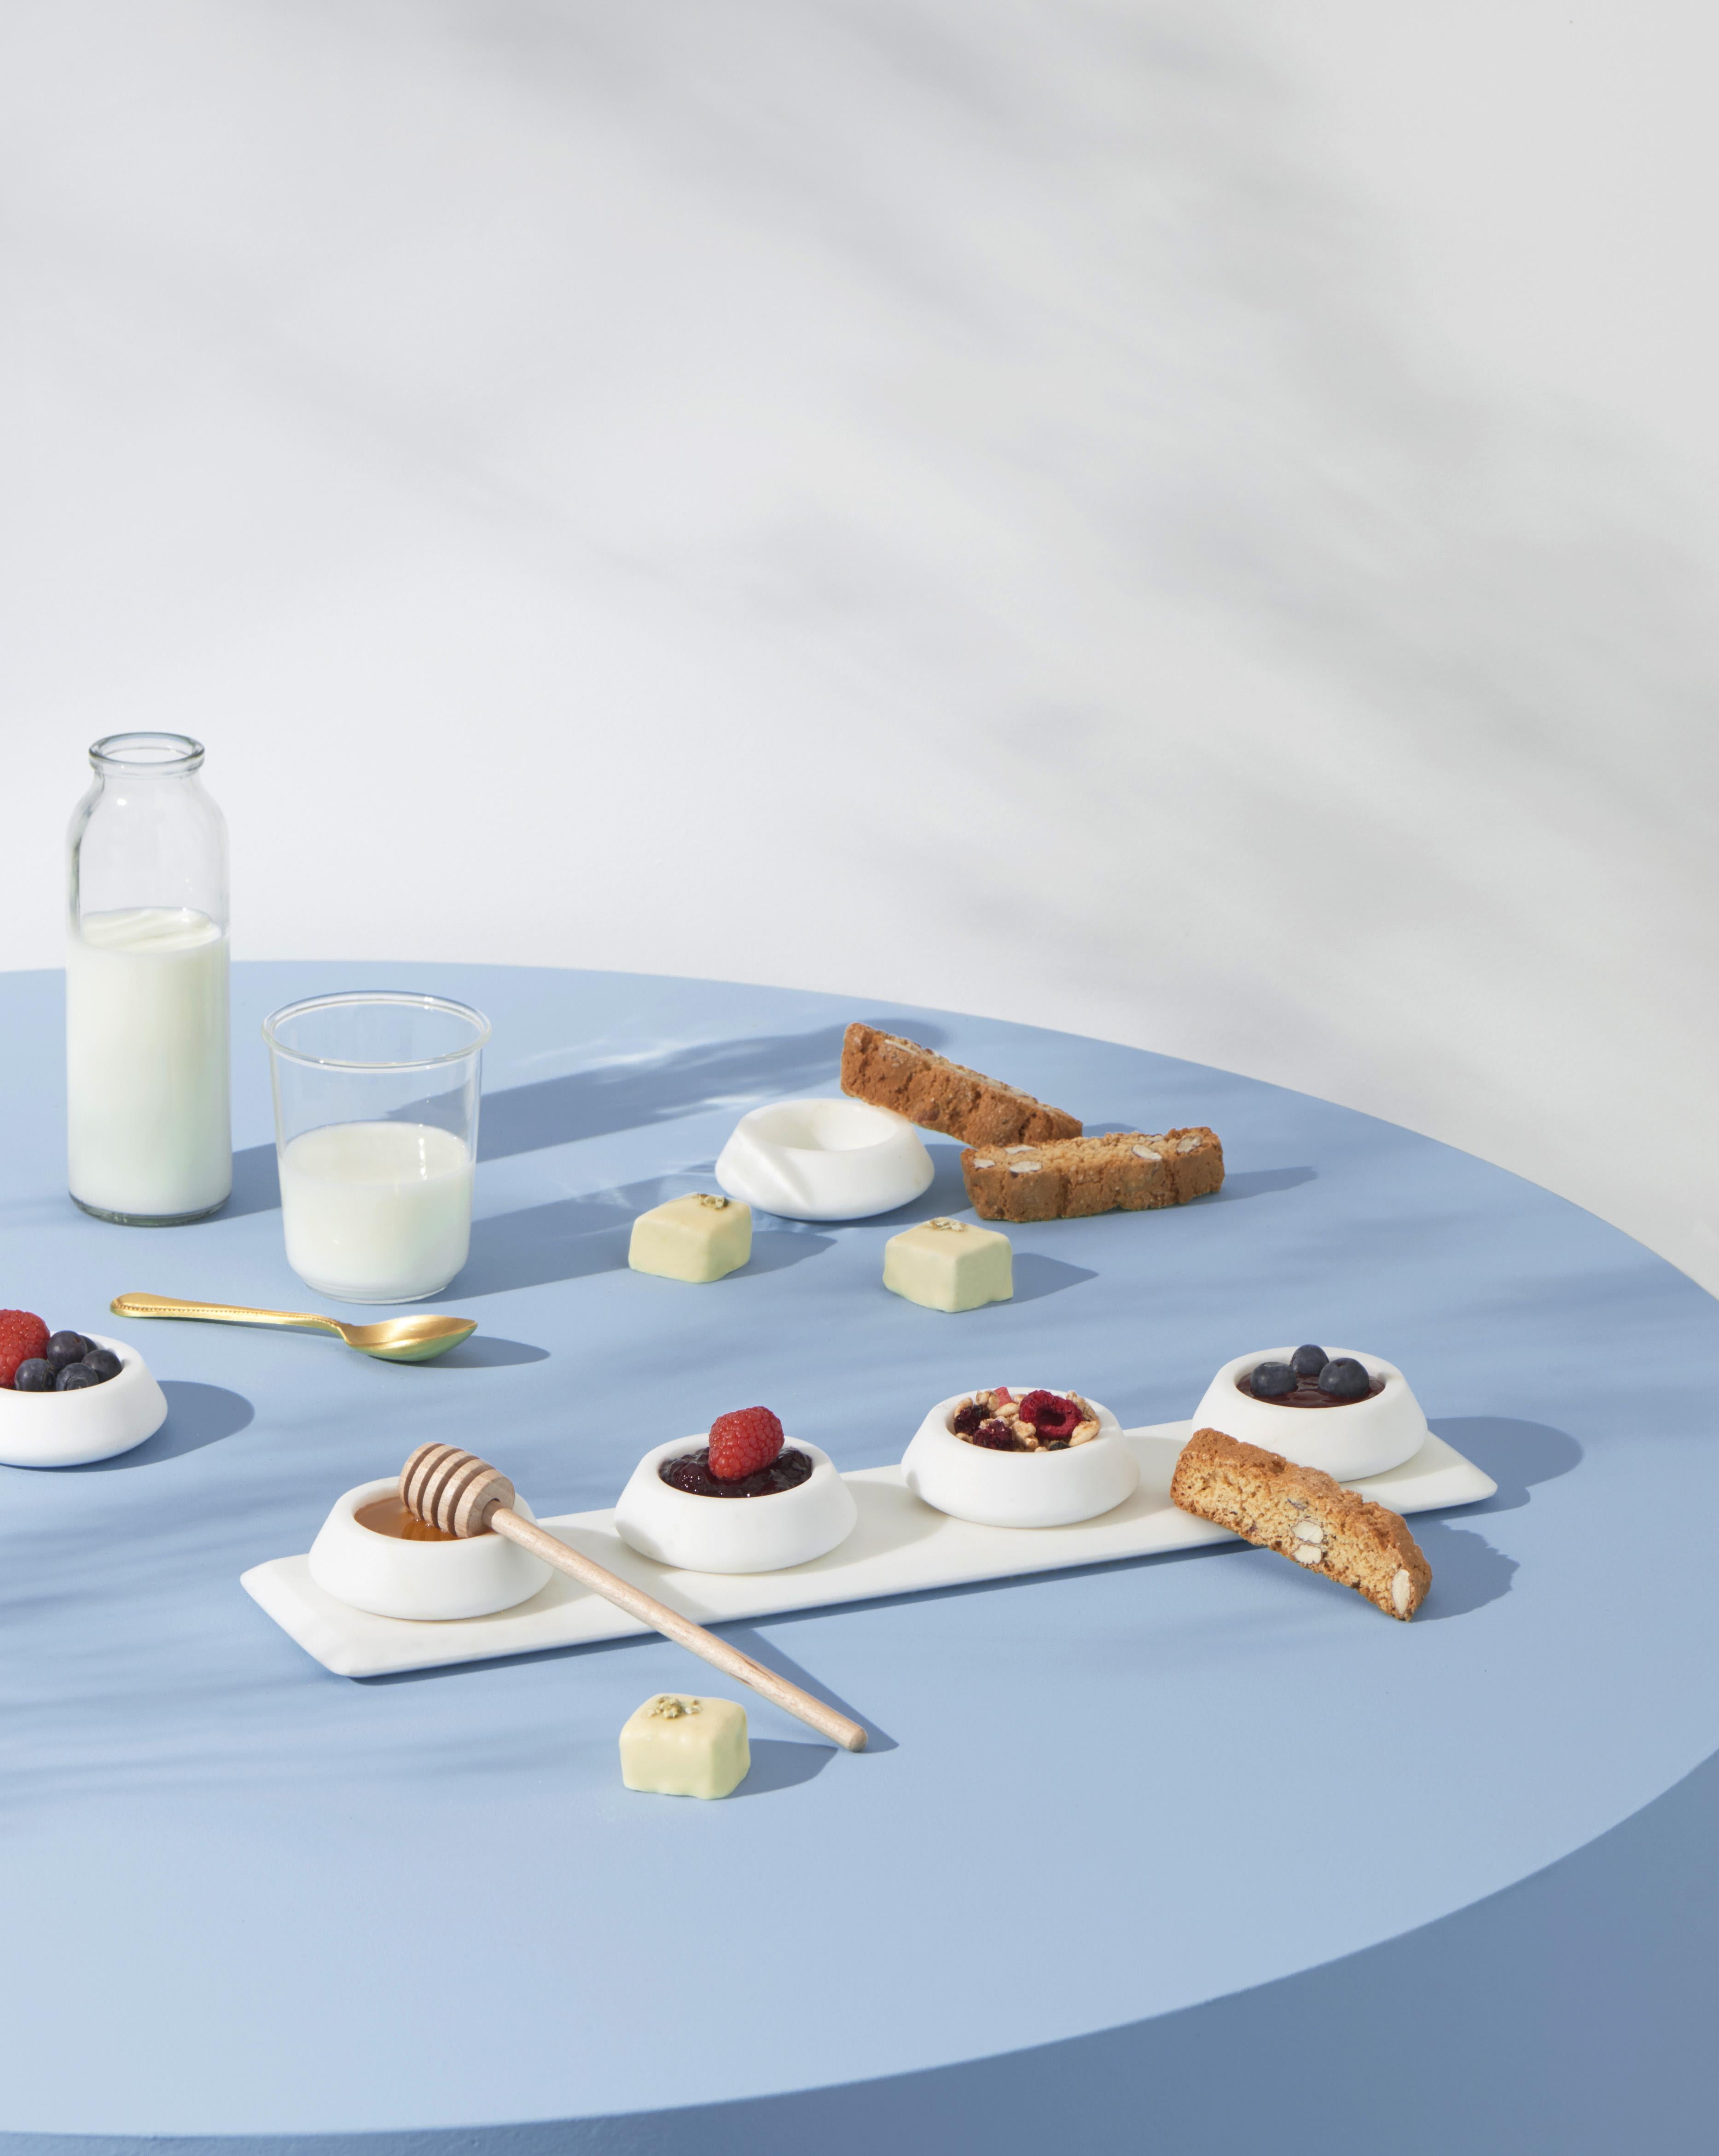 A sculptural shape for a container. Colominas’ project accomplishes curved marble that lends itself to carrying sauces or oils with designs that are always different. The item includes four white Michelangelo marble small bowls.
Size: 39.4 x 9 x 1